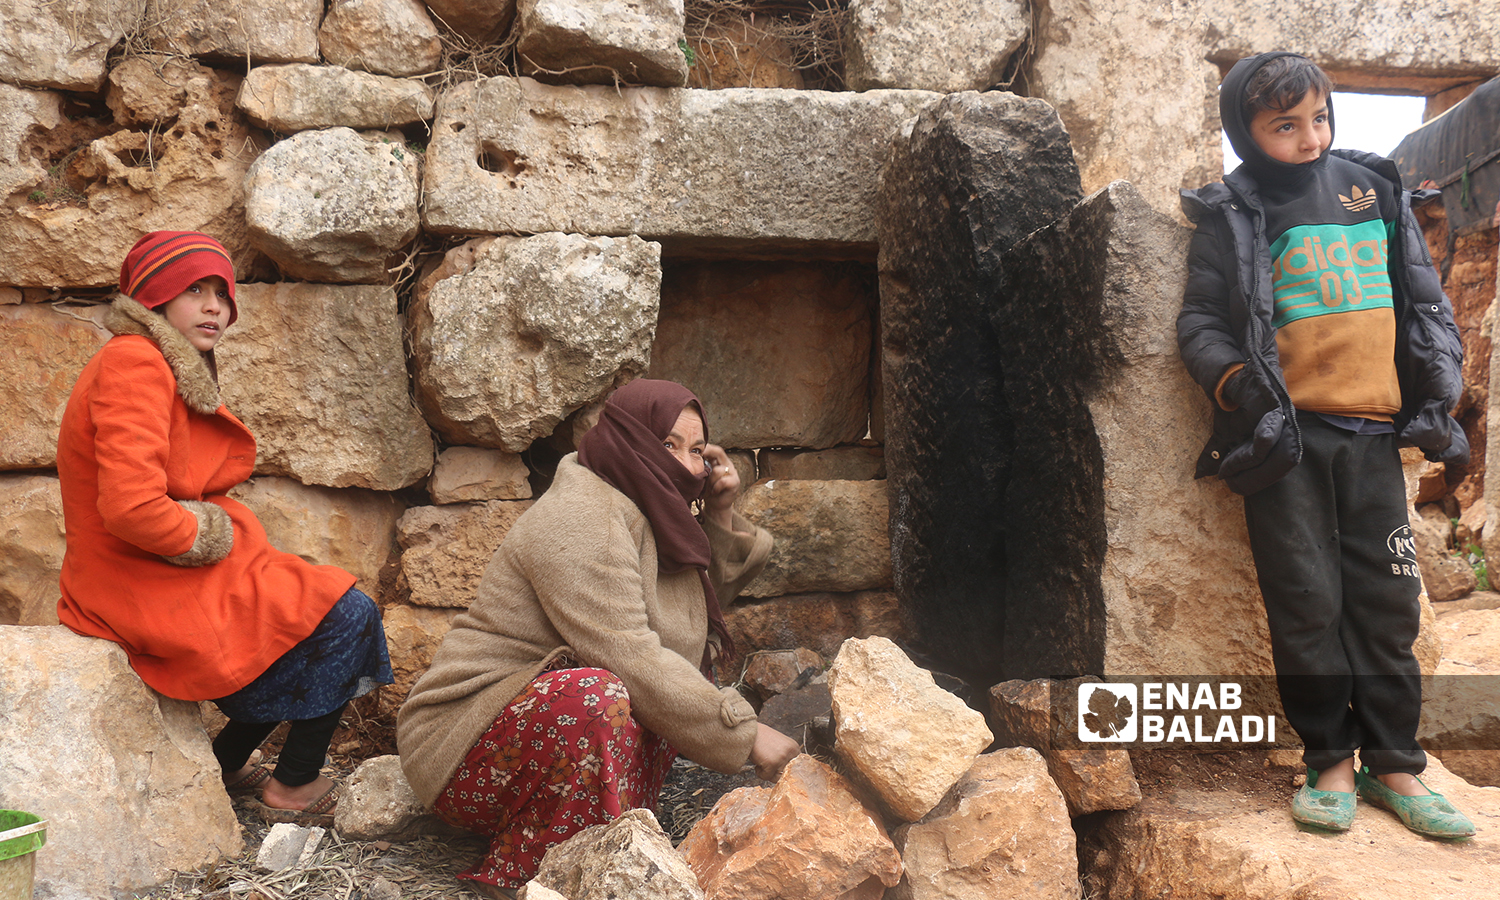 A displaced Syrian woman setting up fire near an archeological site in the historical Sarjableh area in the northern countryside of Idlib governorate - 22 January 2022 (Enab Baladi / Iyad Abdul Jawad)
